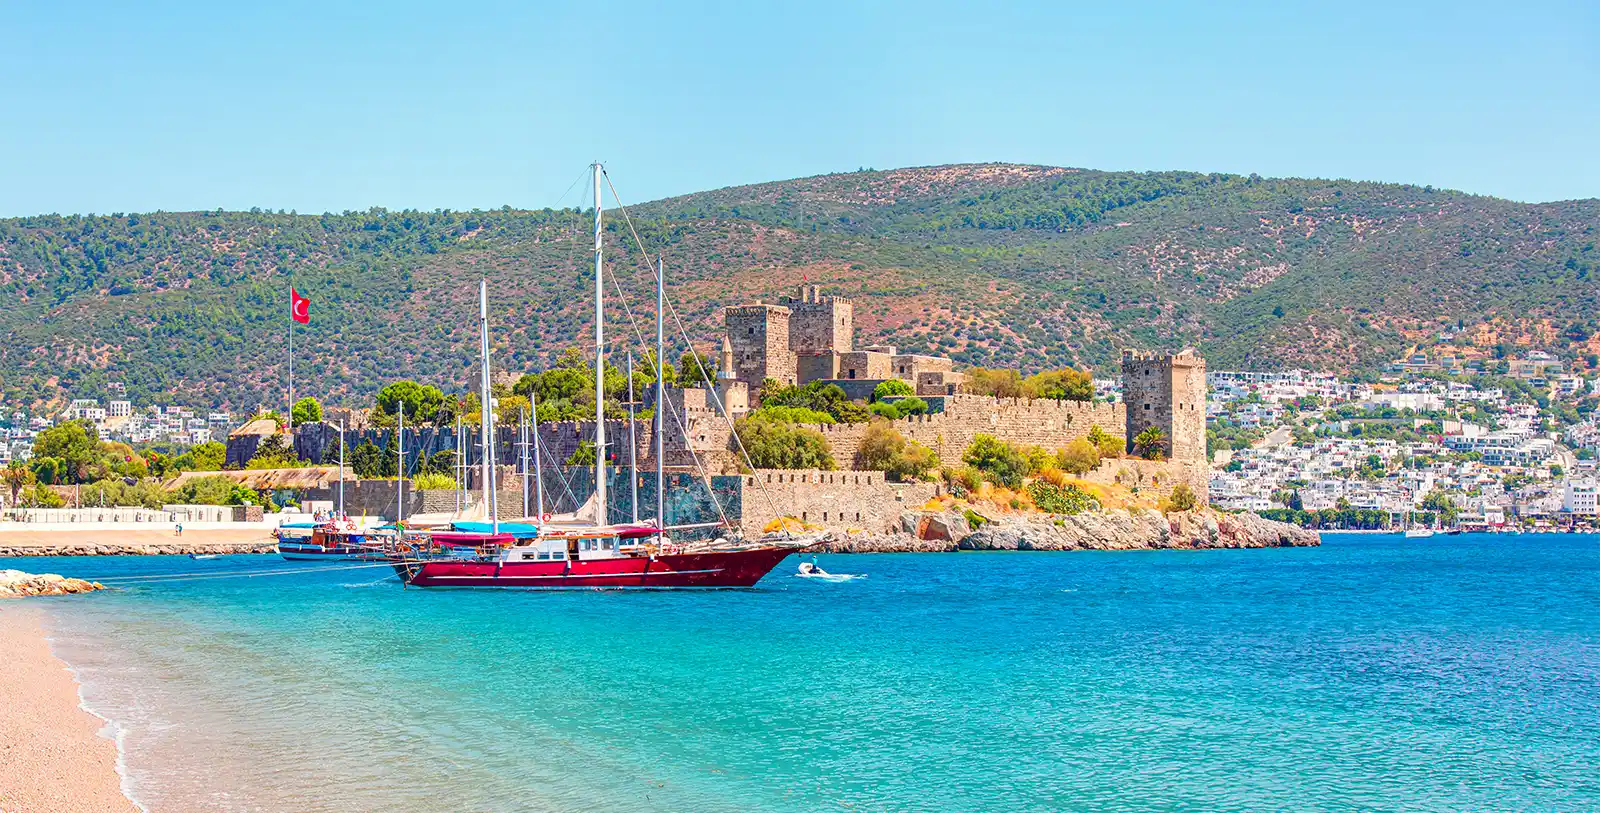 St. Peter's Castle is a major Bodrum attraction.